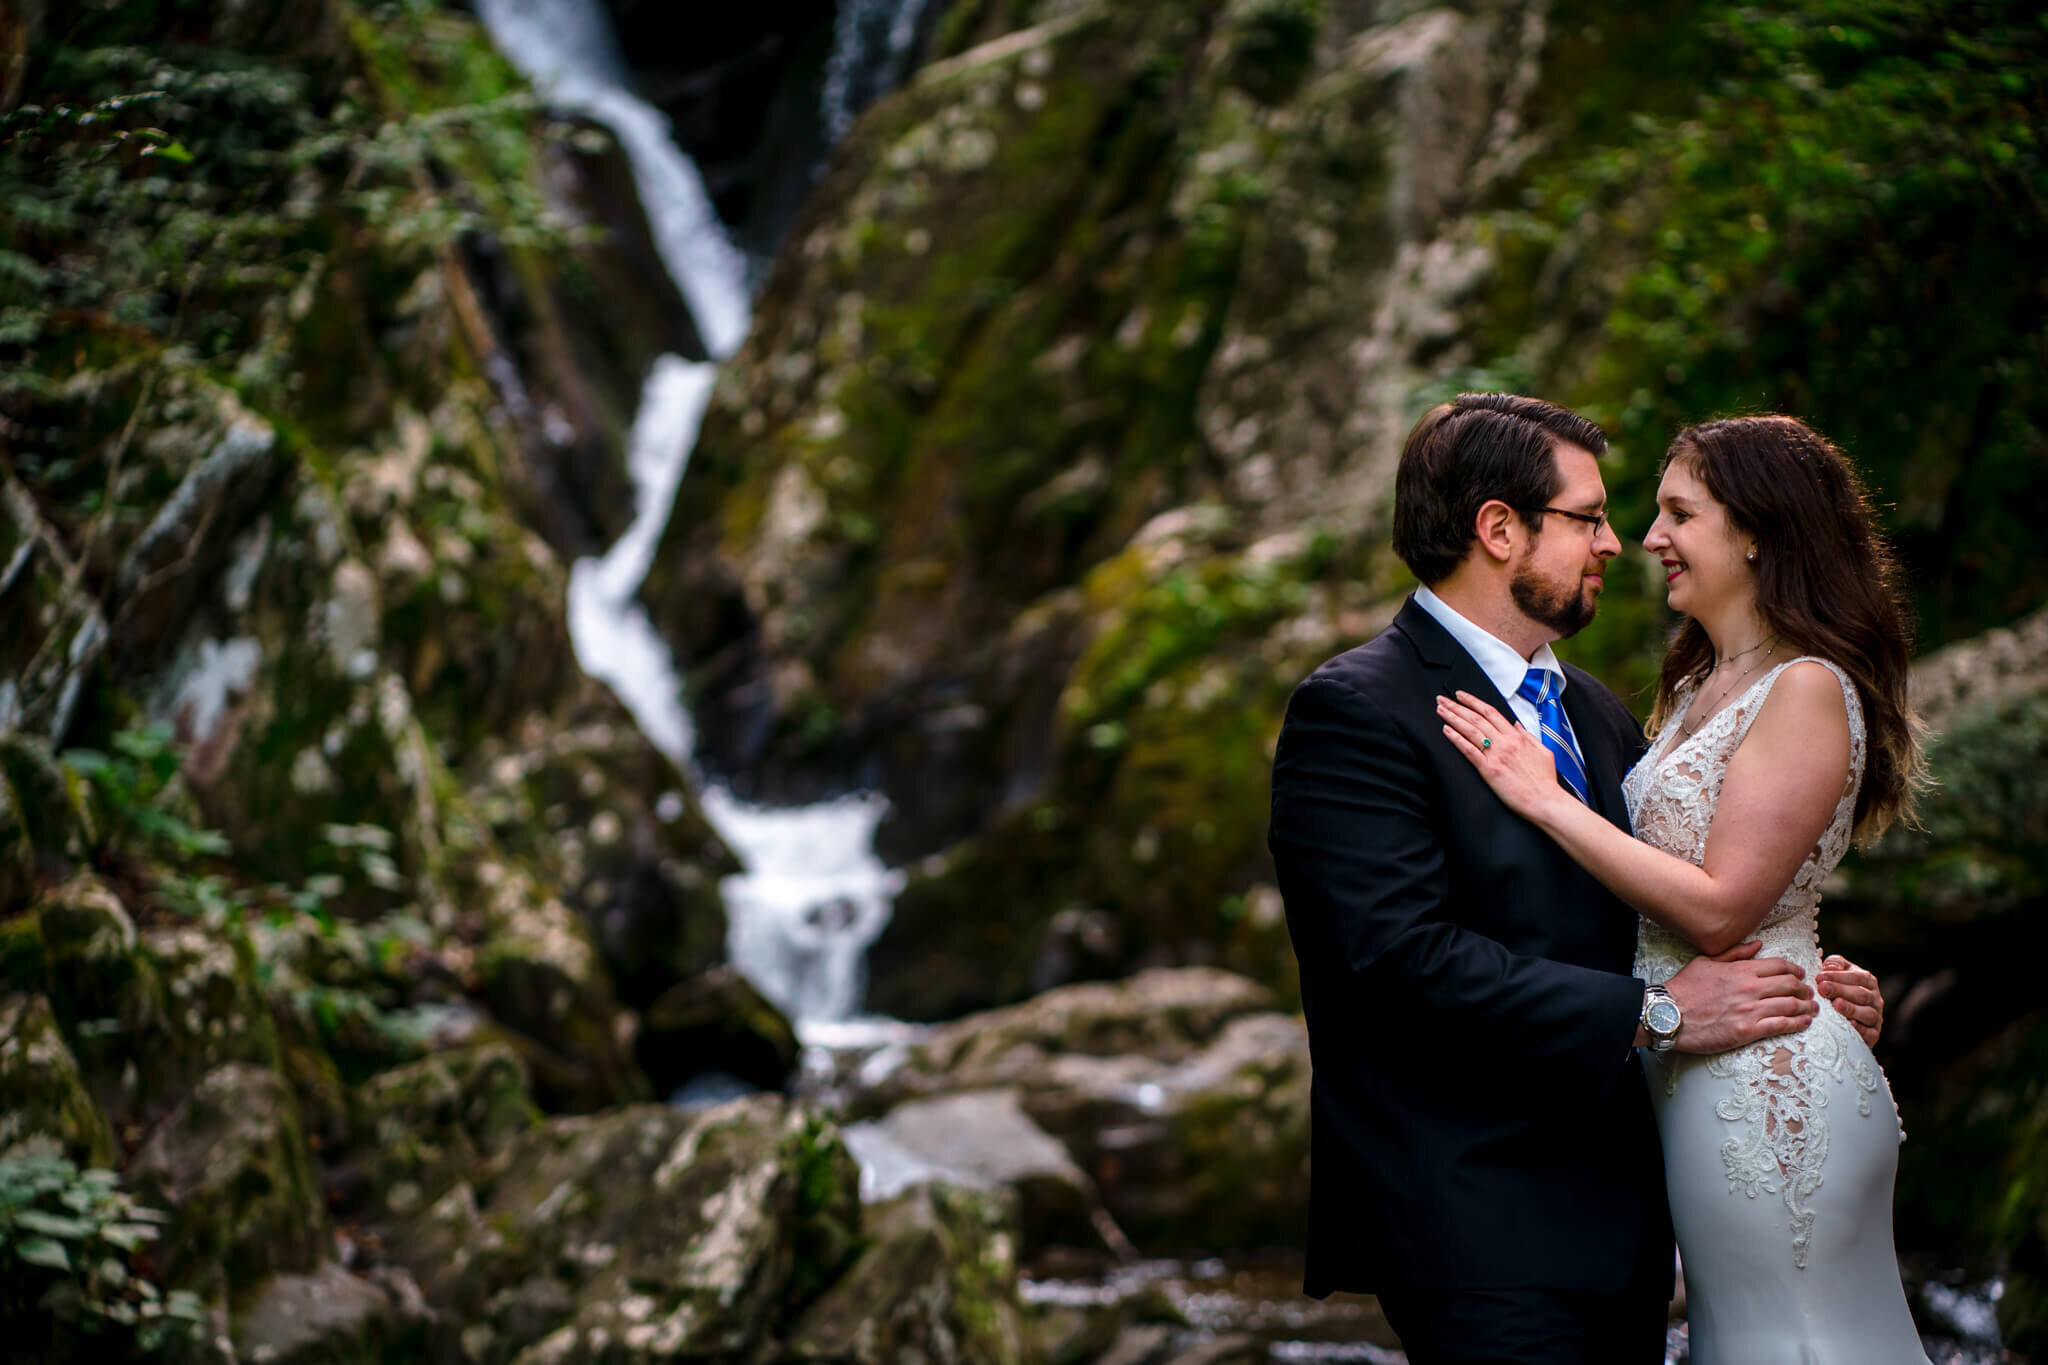 Dark-Hollow-Falls-Point-Overlook-Shenandoah-Adventure-Wedding-Portrait-Session-Photography-by-Bee-Two-Sweet-52.jpg